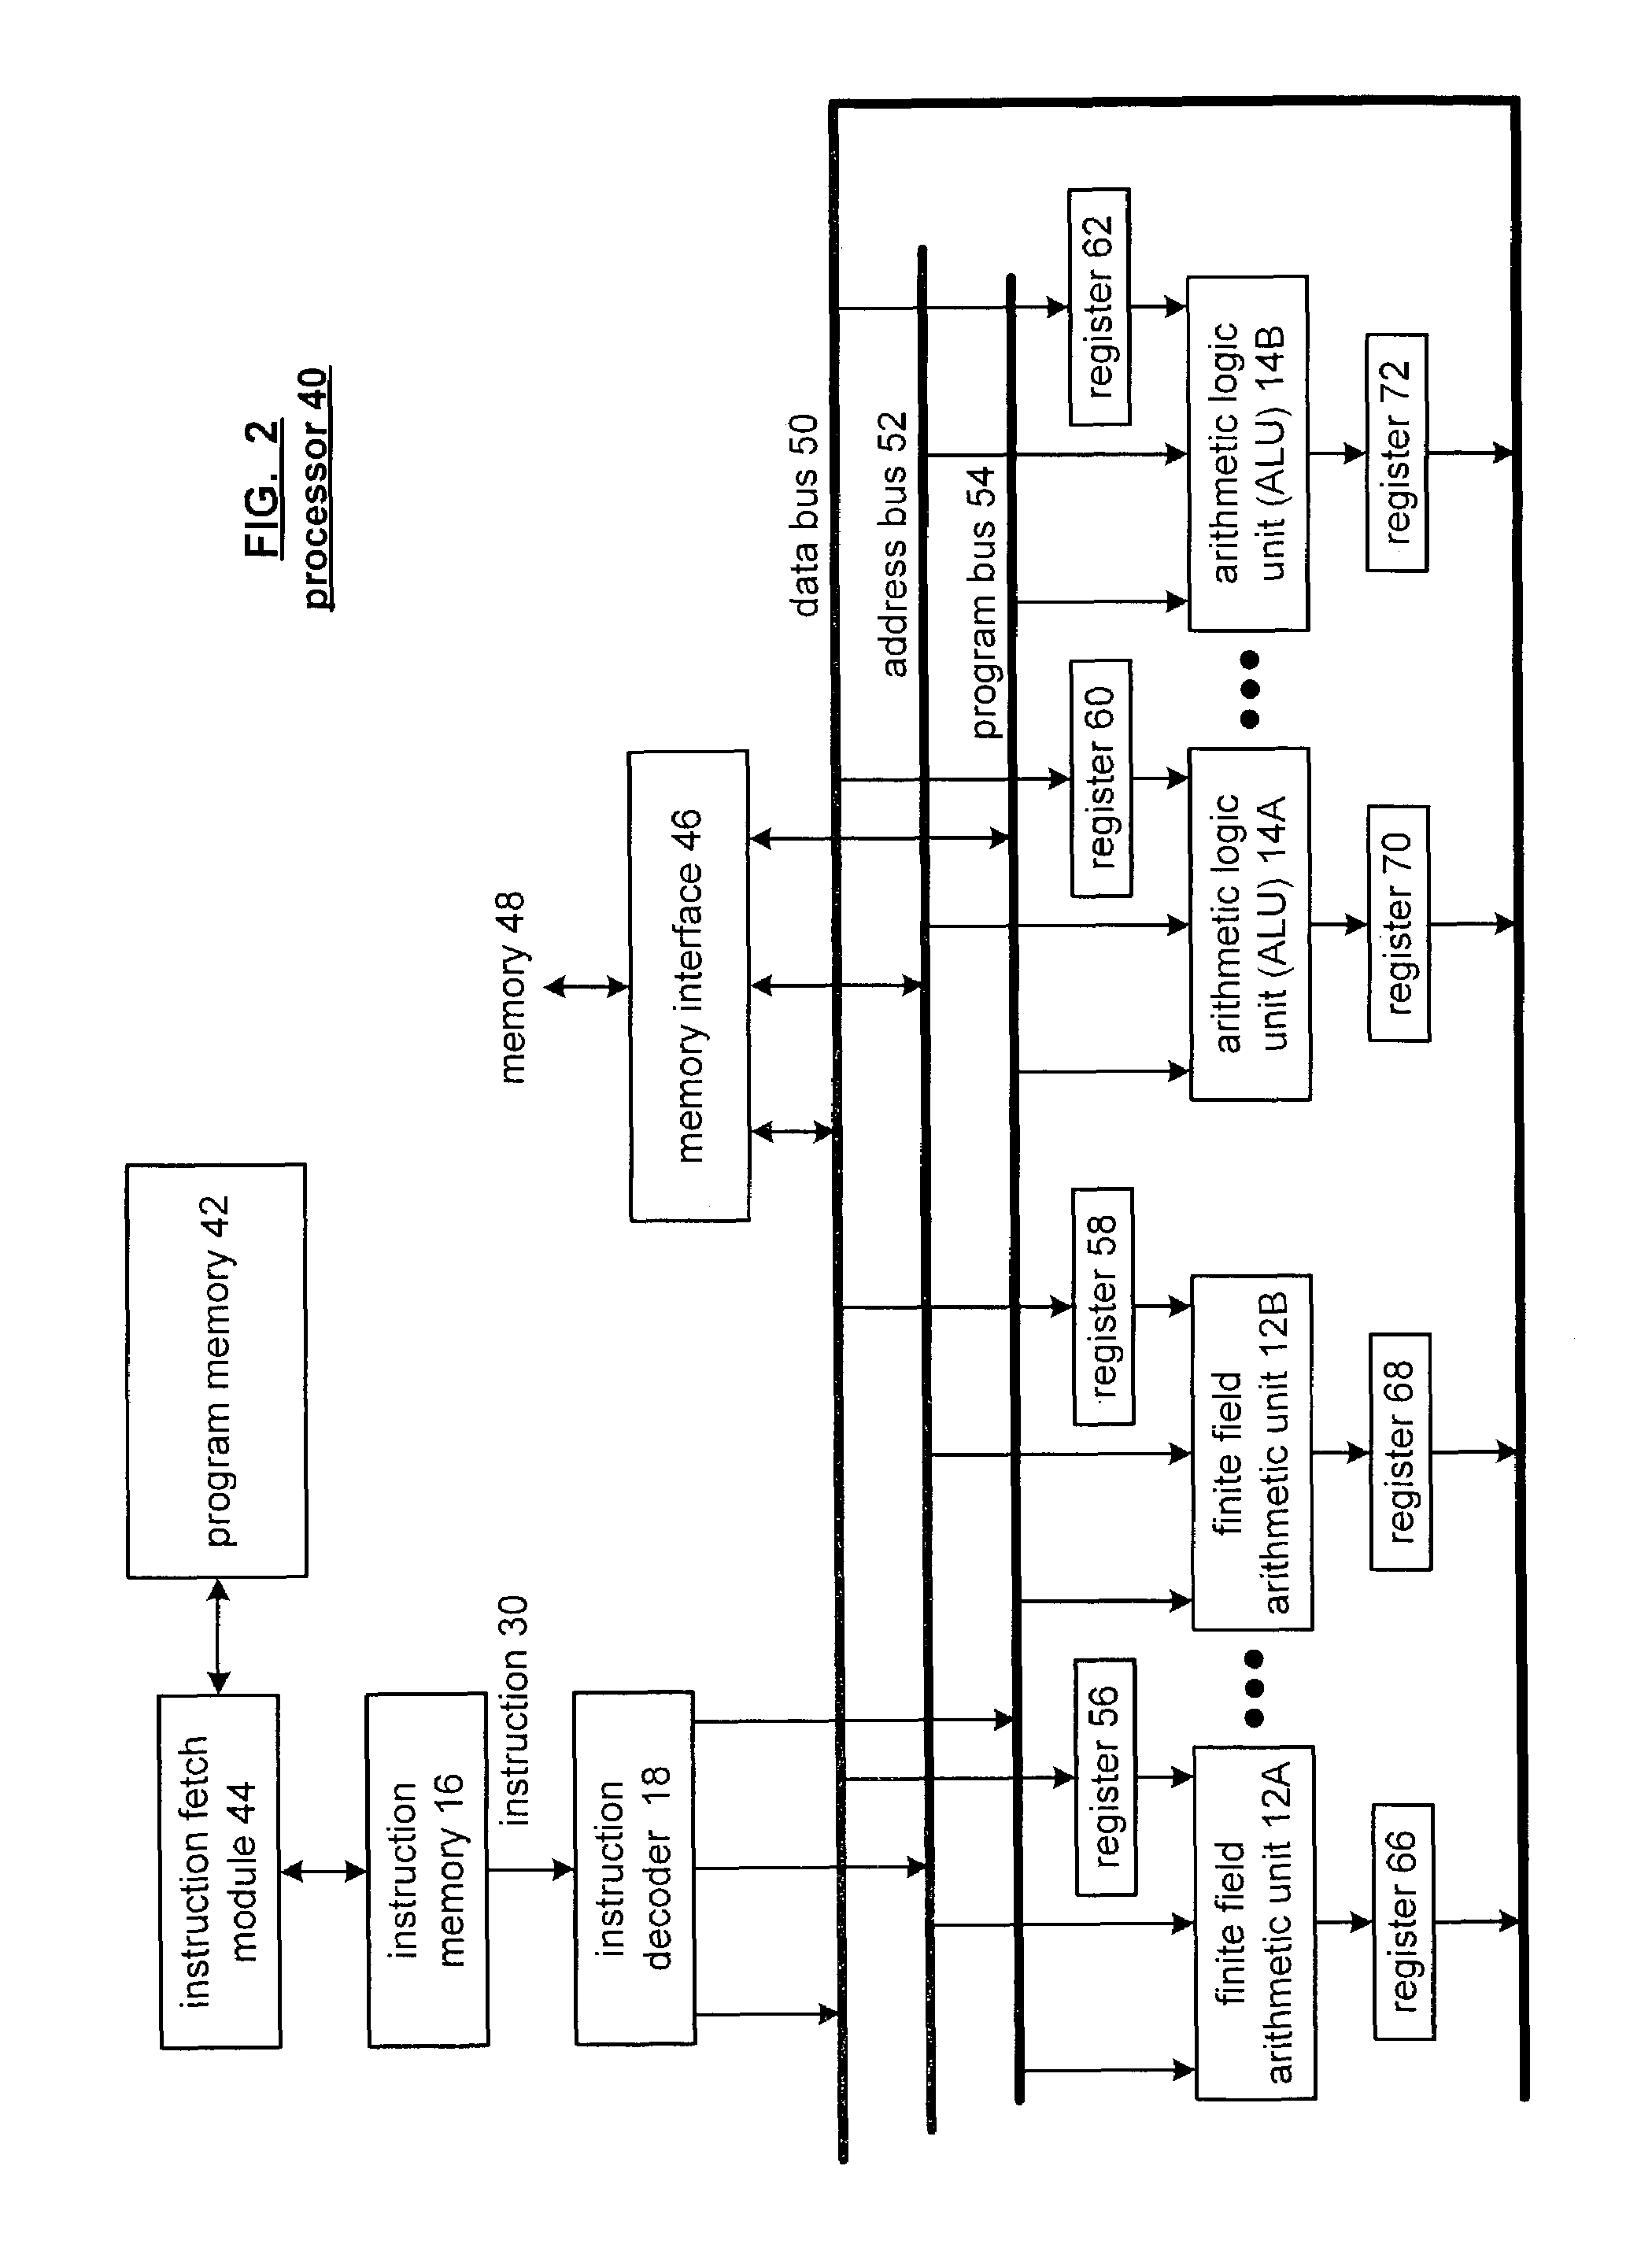 Galois field arithmetic unit for use within a processor